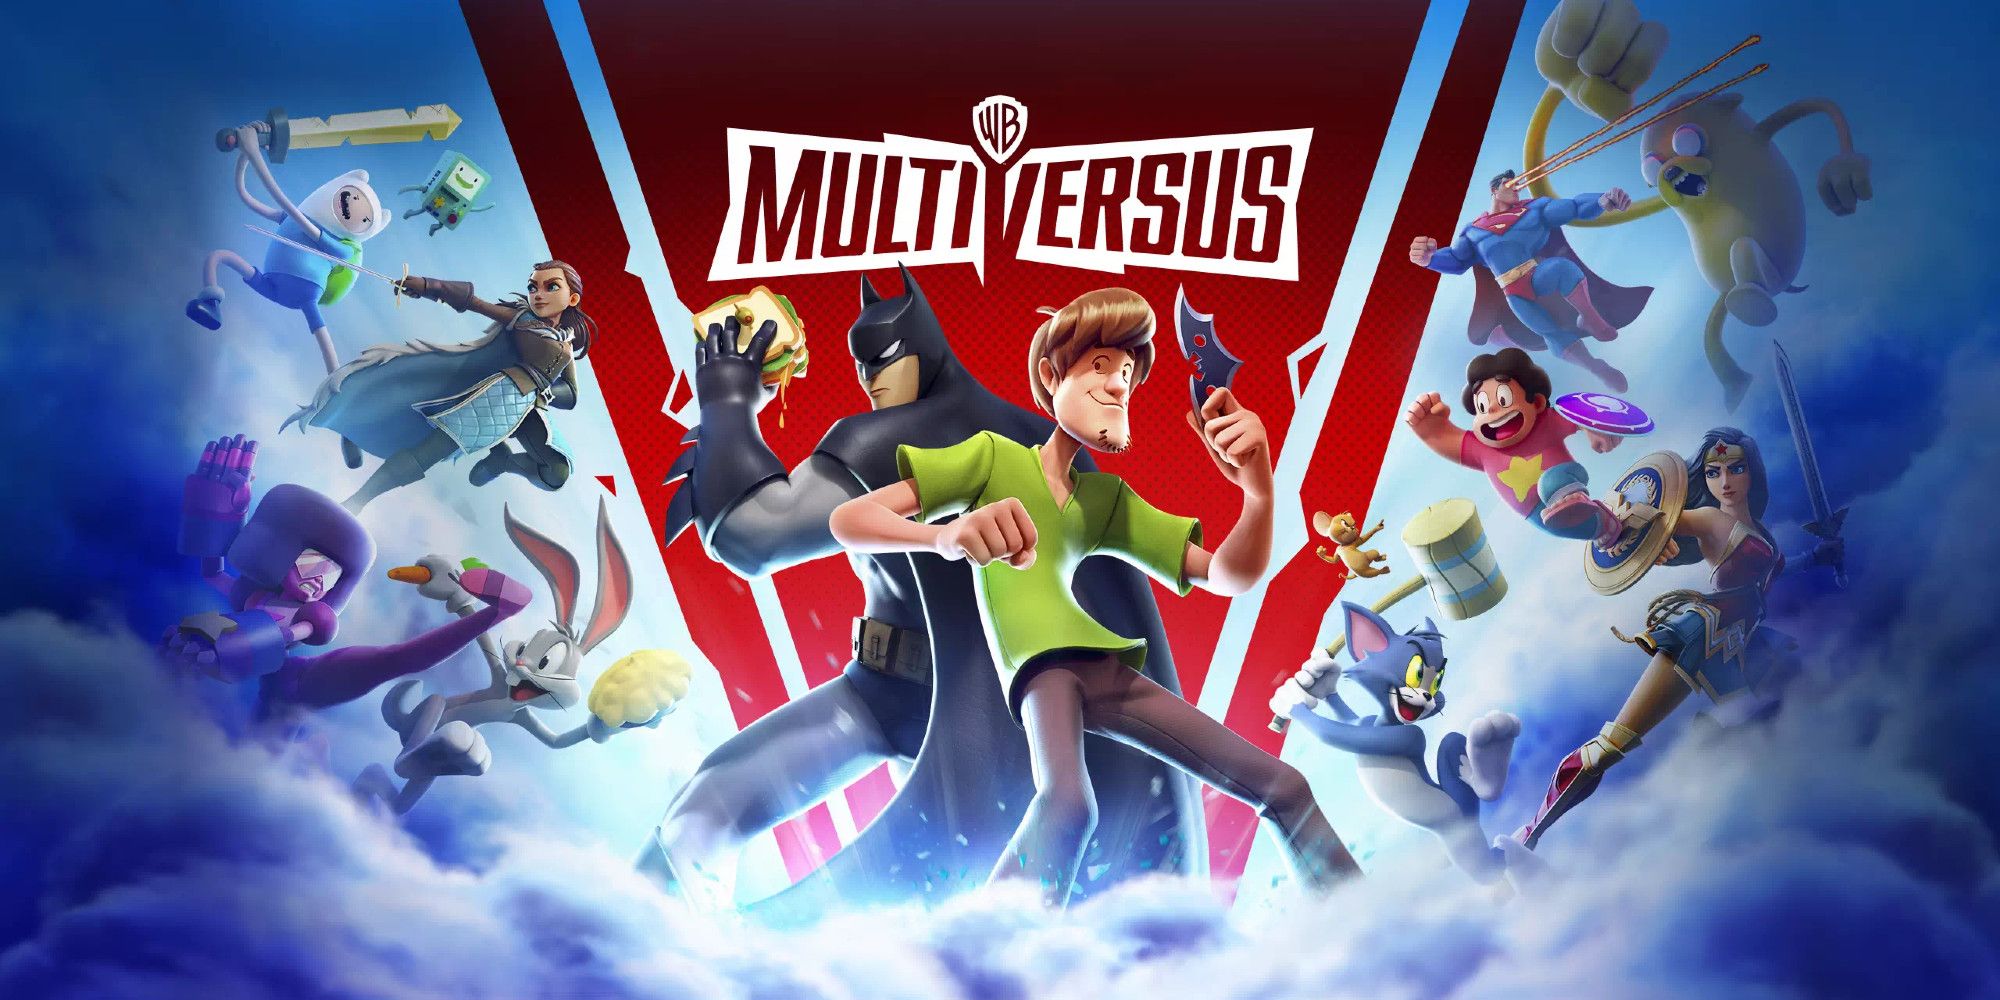 Characters from MultiVersus appear in promotional art 